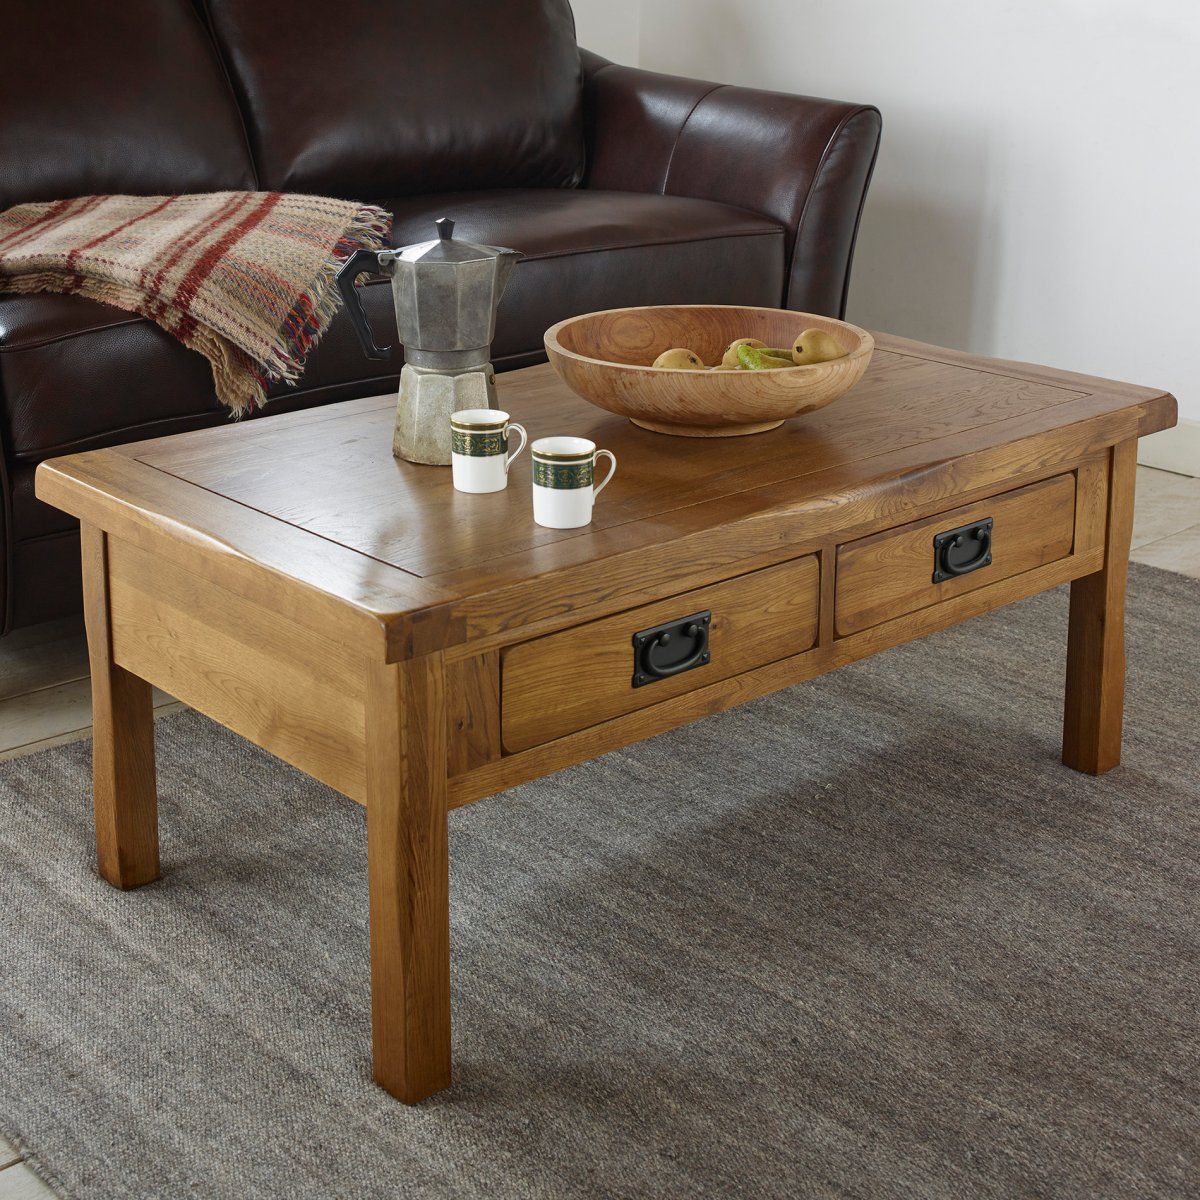 Original Rustic 4 Drawer Coffee Table In Solid Oak Pertaining To Rustic Coffee Tables (Gallery 5 of 20)